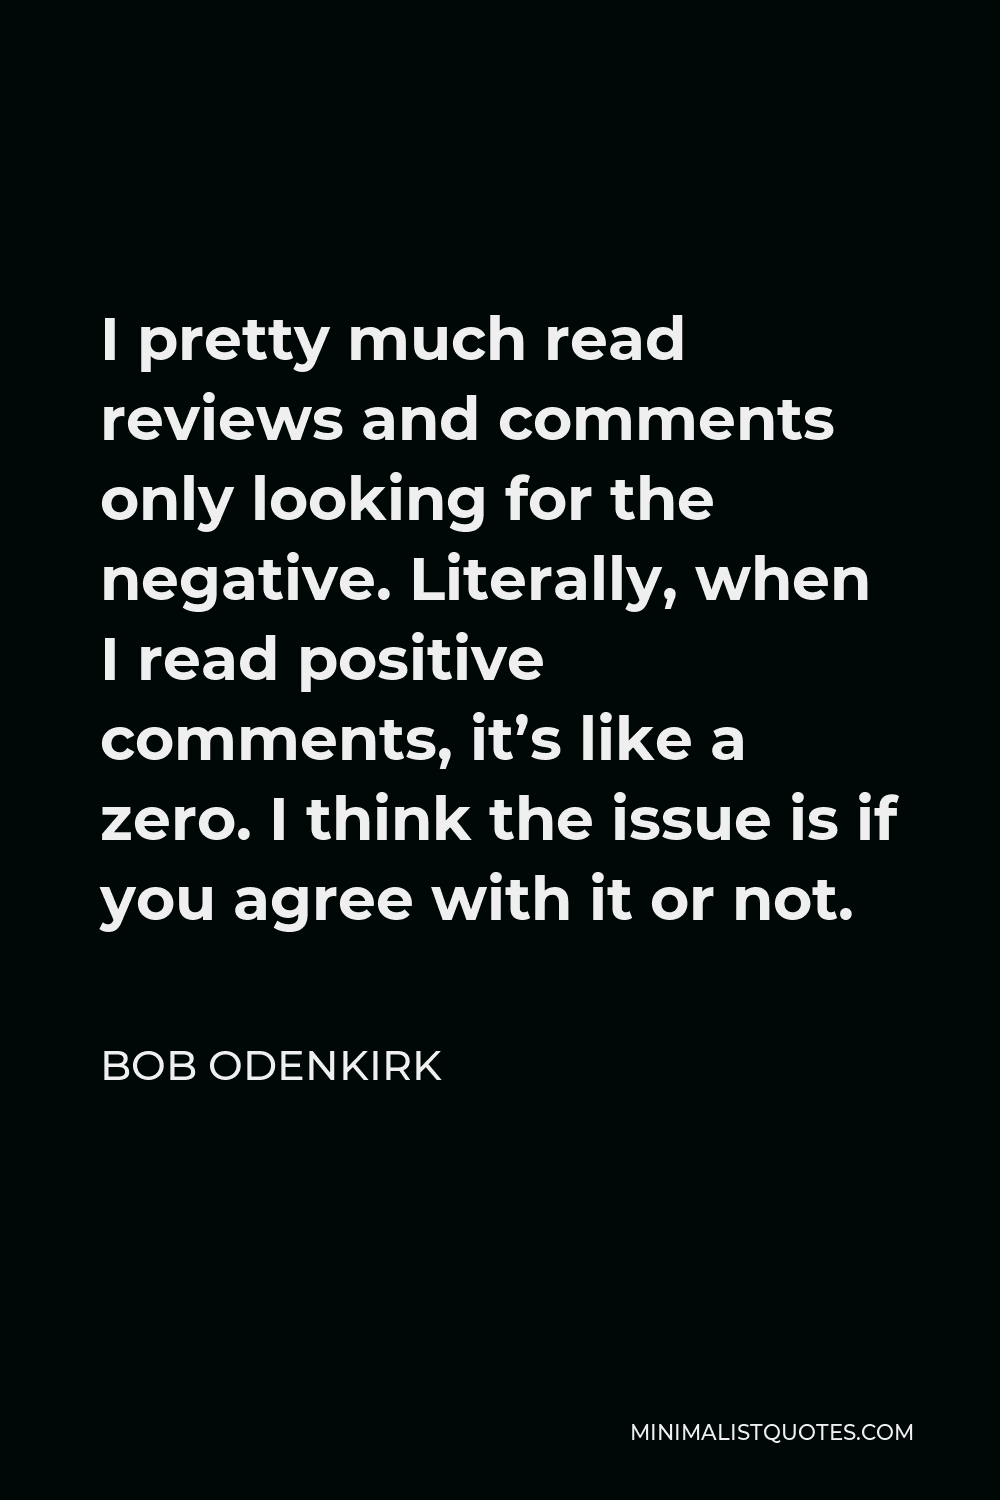 Bob Odenkirk Quote - I pretty much read reviews and comments only looking for the negative. Literally, when I read positive comments, it’s like a zero. I think the issue is if you agree with it or not.